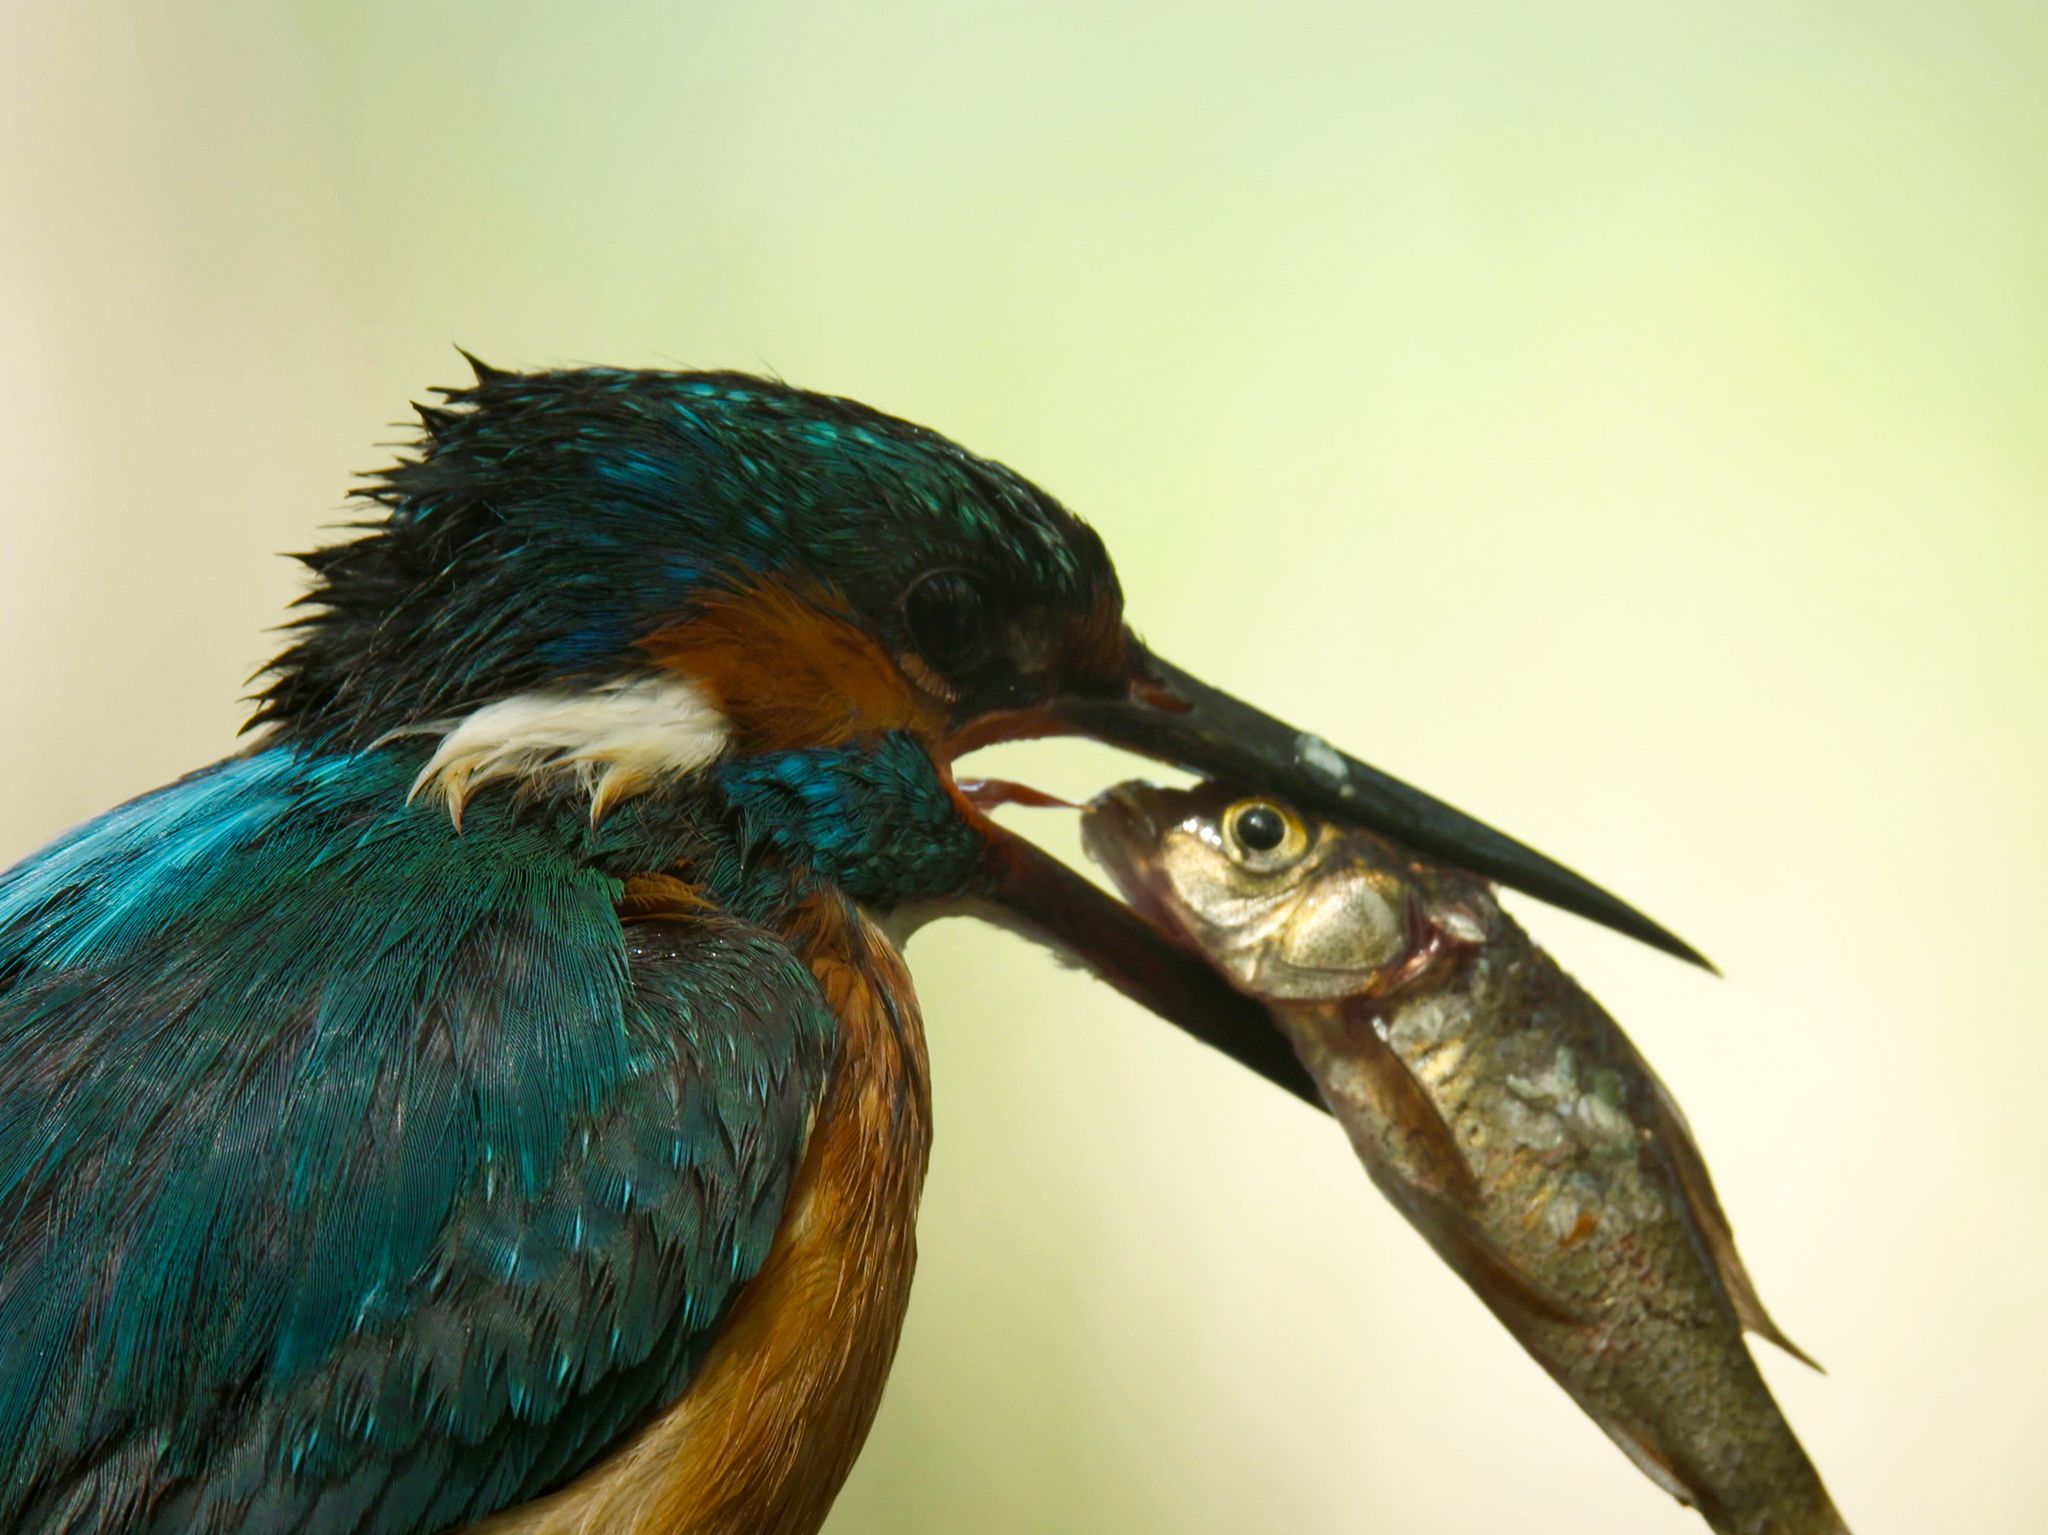 A close up of a Kingfisher after having caught its prey (a trout) with its beak. This image is... [Photo of the day - May 2020]